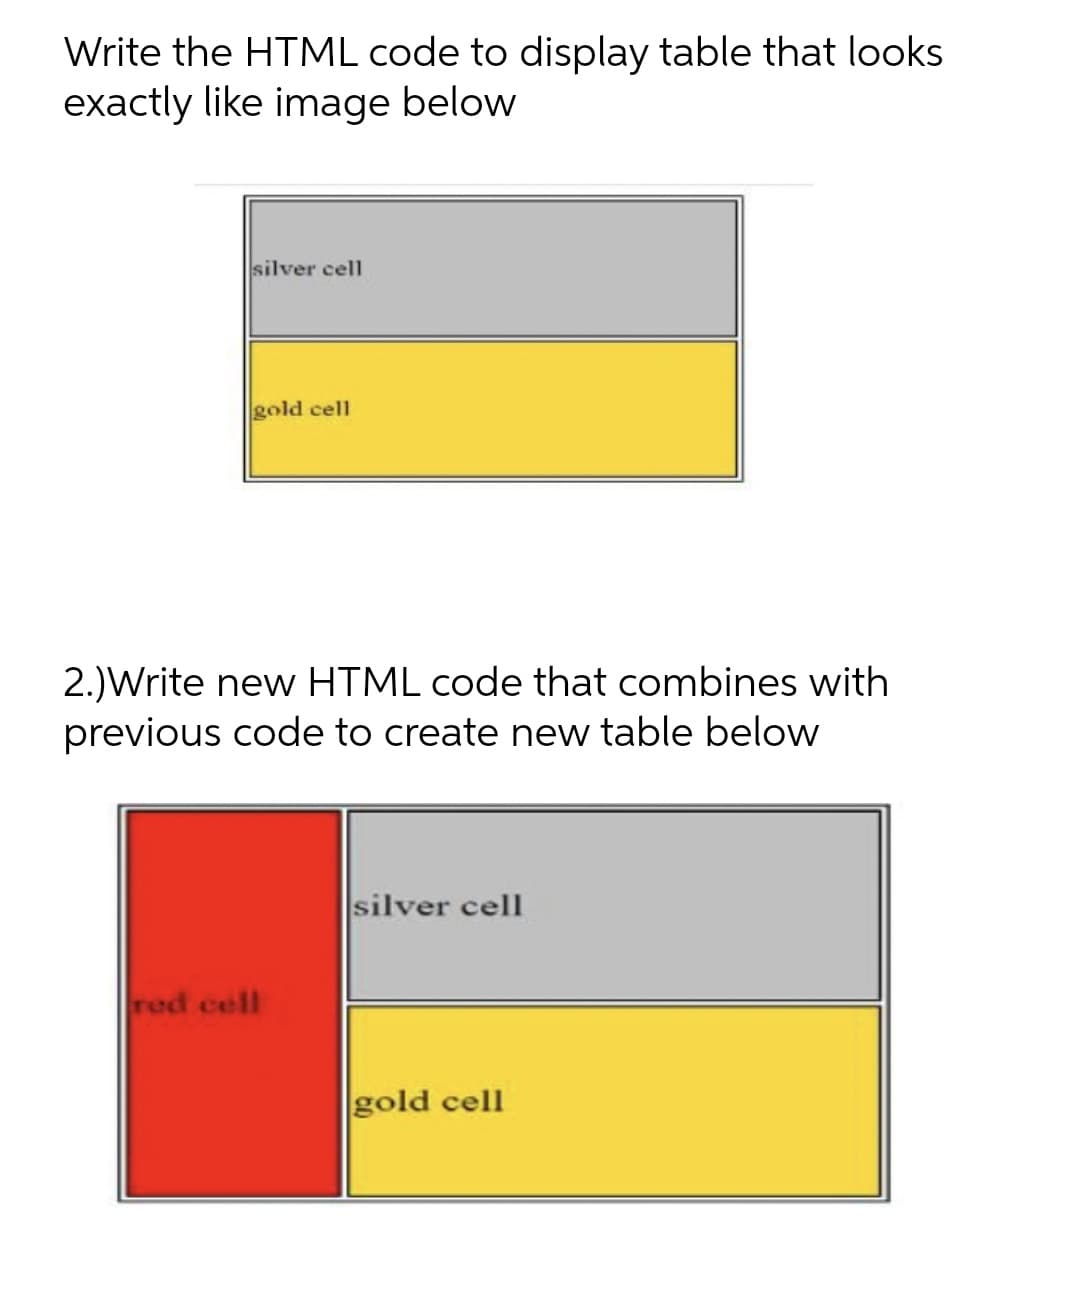 Write the HTML code to display table that looks
exactly like image below
silver cell
gold cell
2.)Write new HTML code that combines with
previous code to create new table below
silver cell
red cell
gold cell
